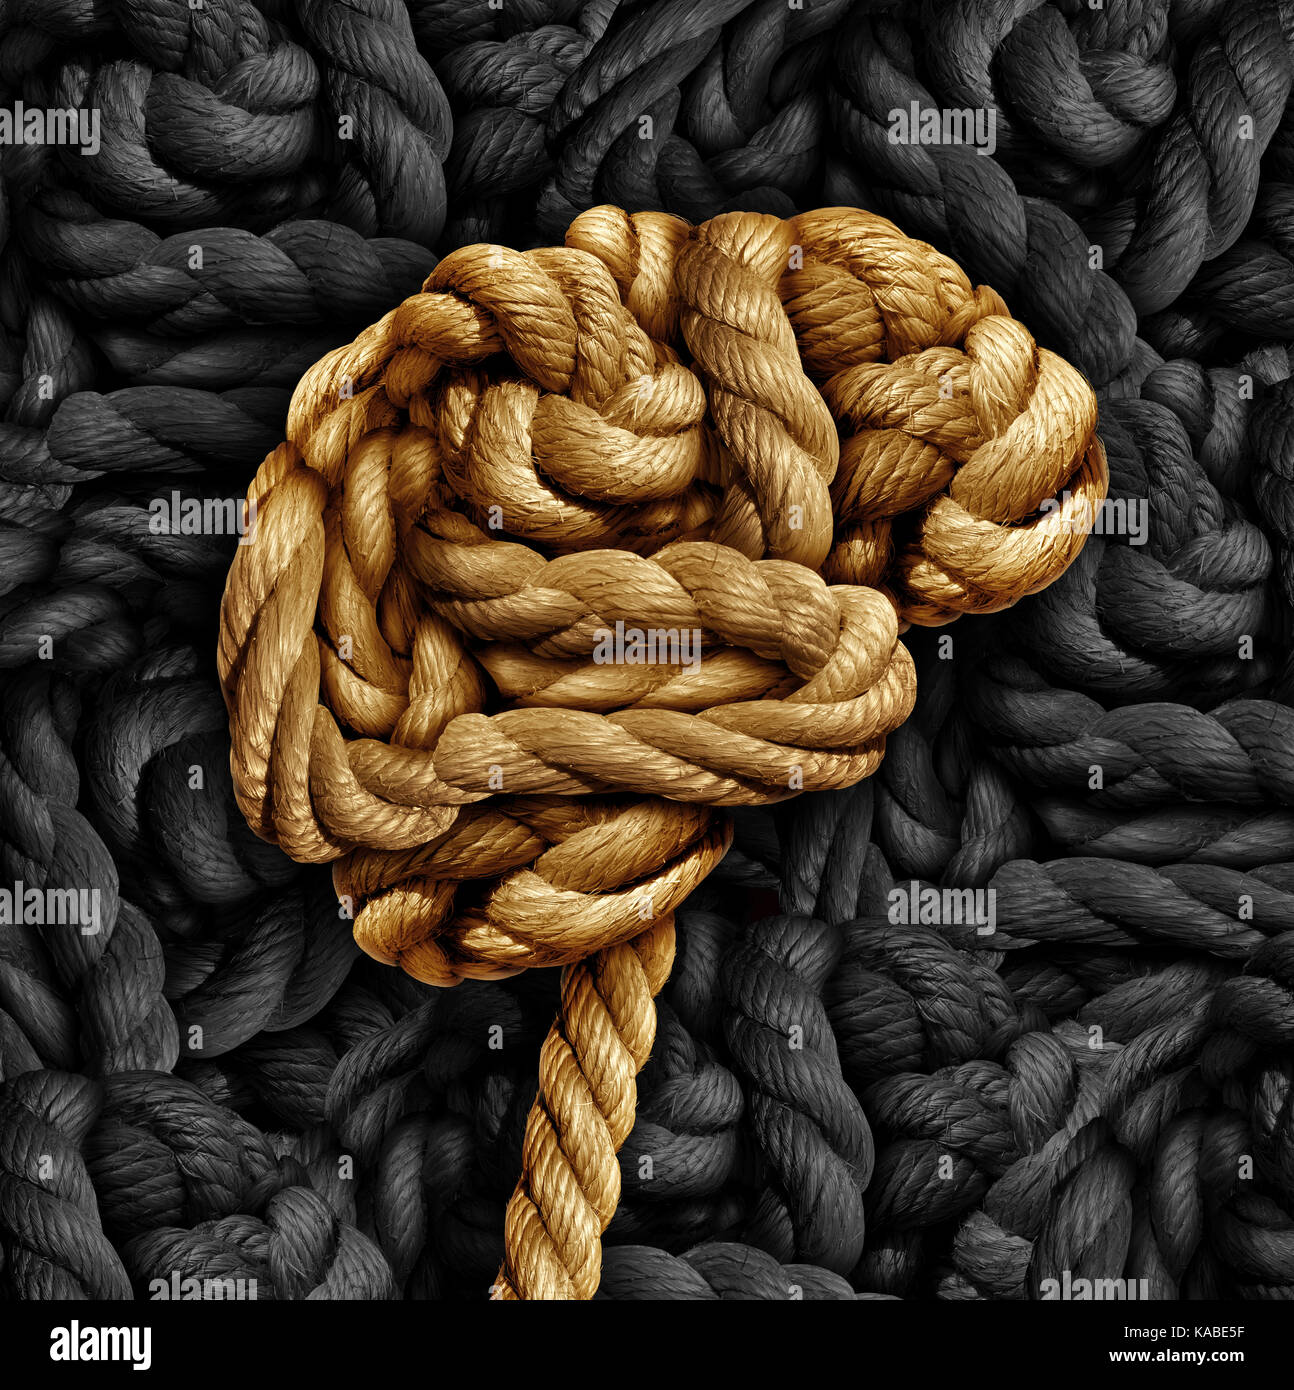 Brain disorder mental health concept as a rope twisted into a human thinking organ as a medical neurological symbol for mind function. Stock Photo